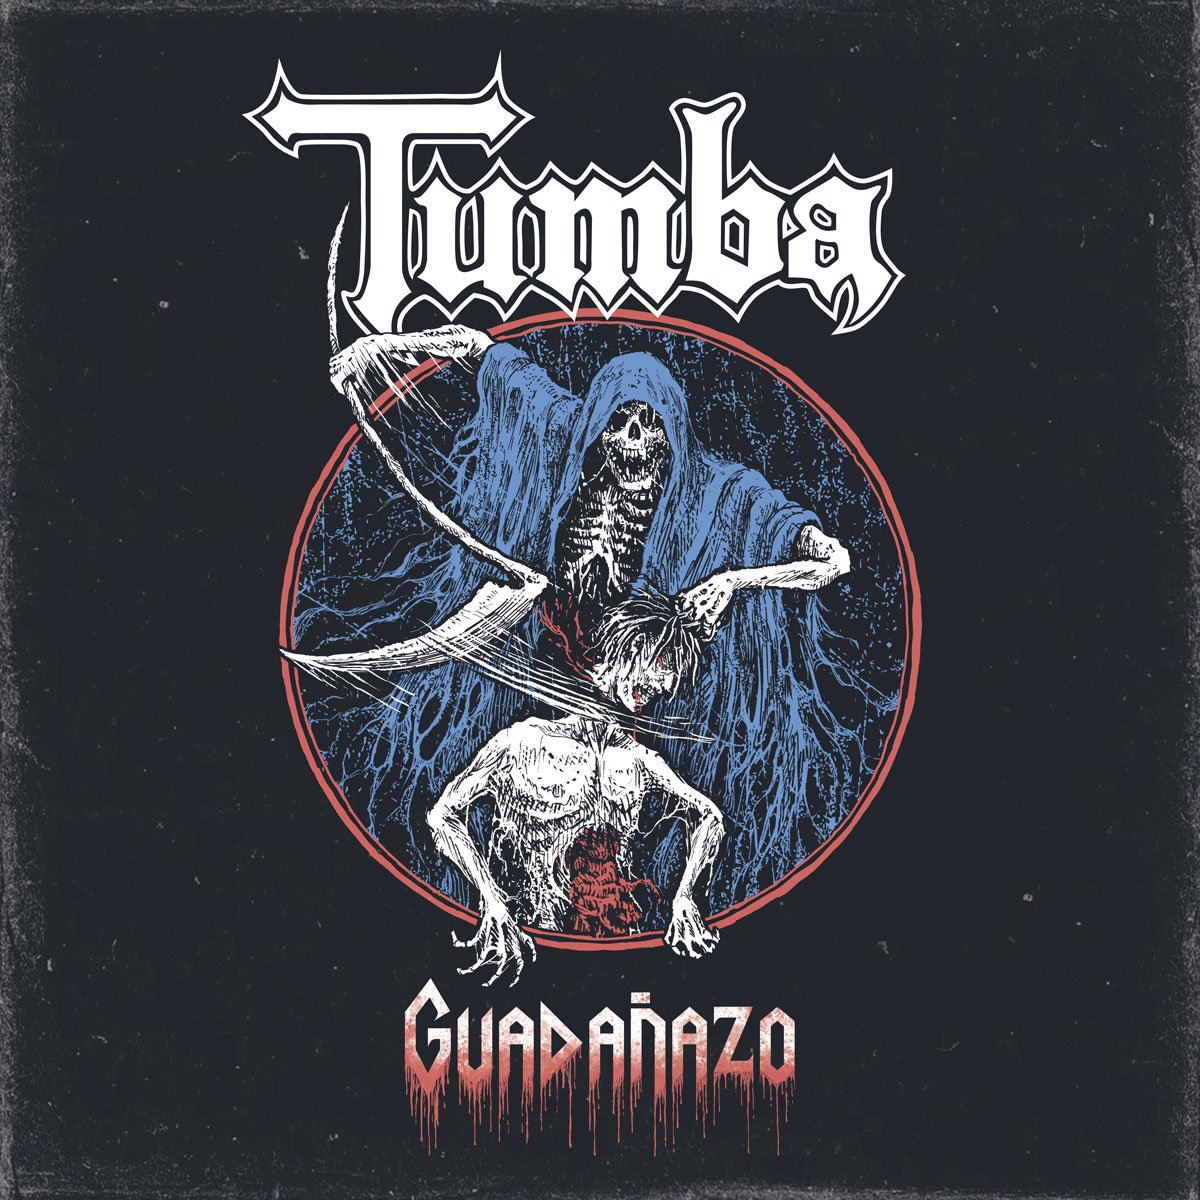 Interview with TUMBA